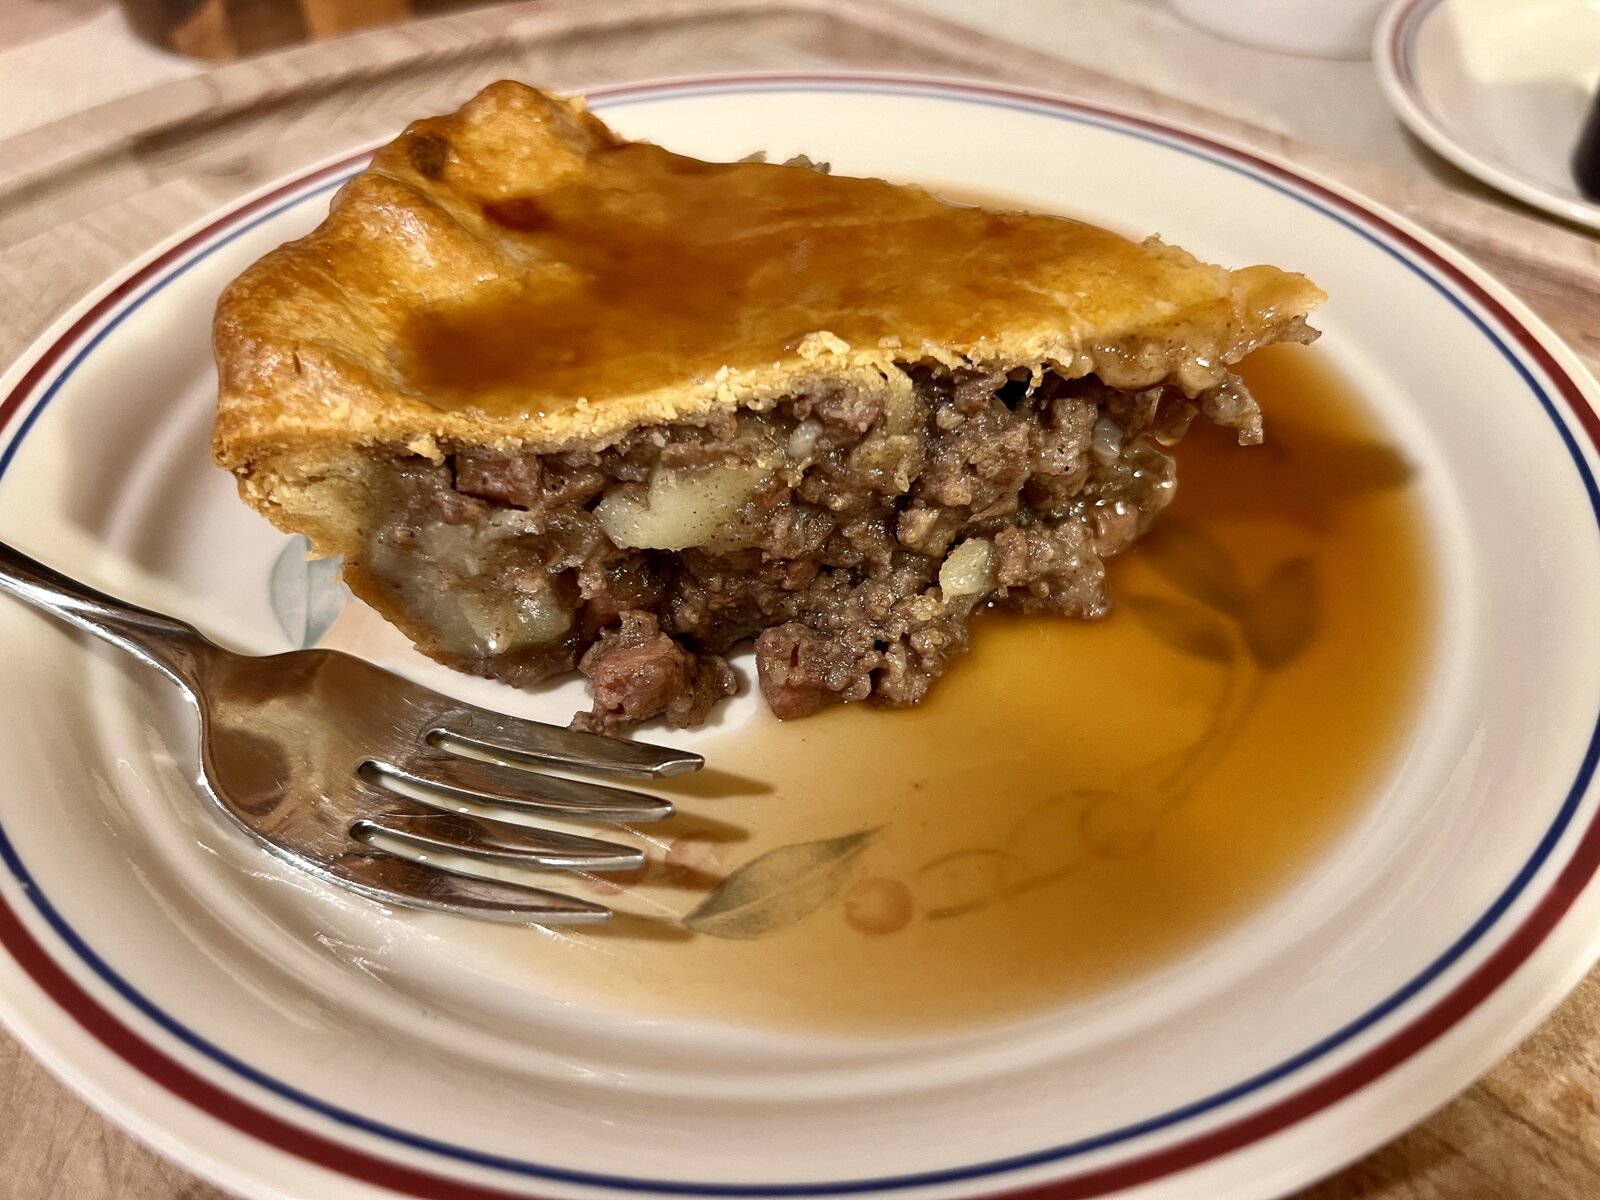 Tourtiere on the plate (w/ Bisto)